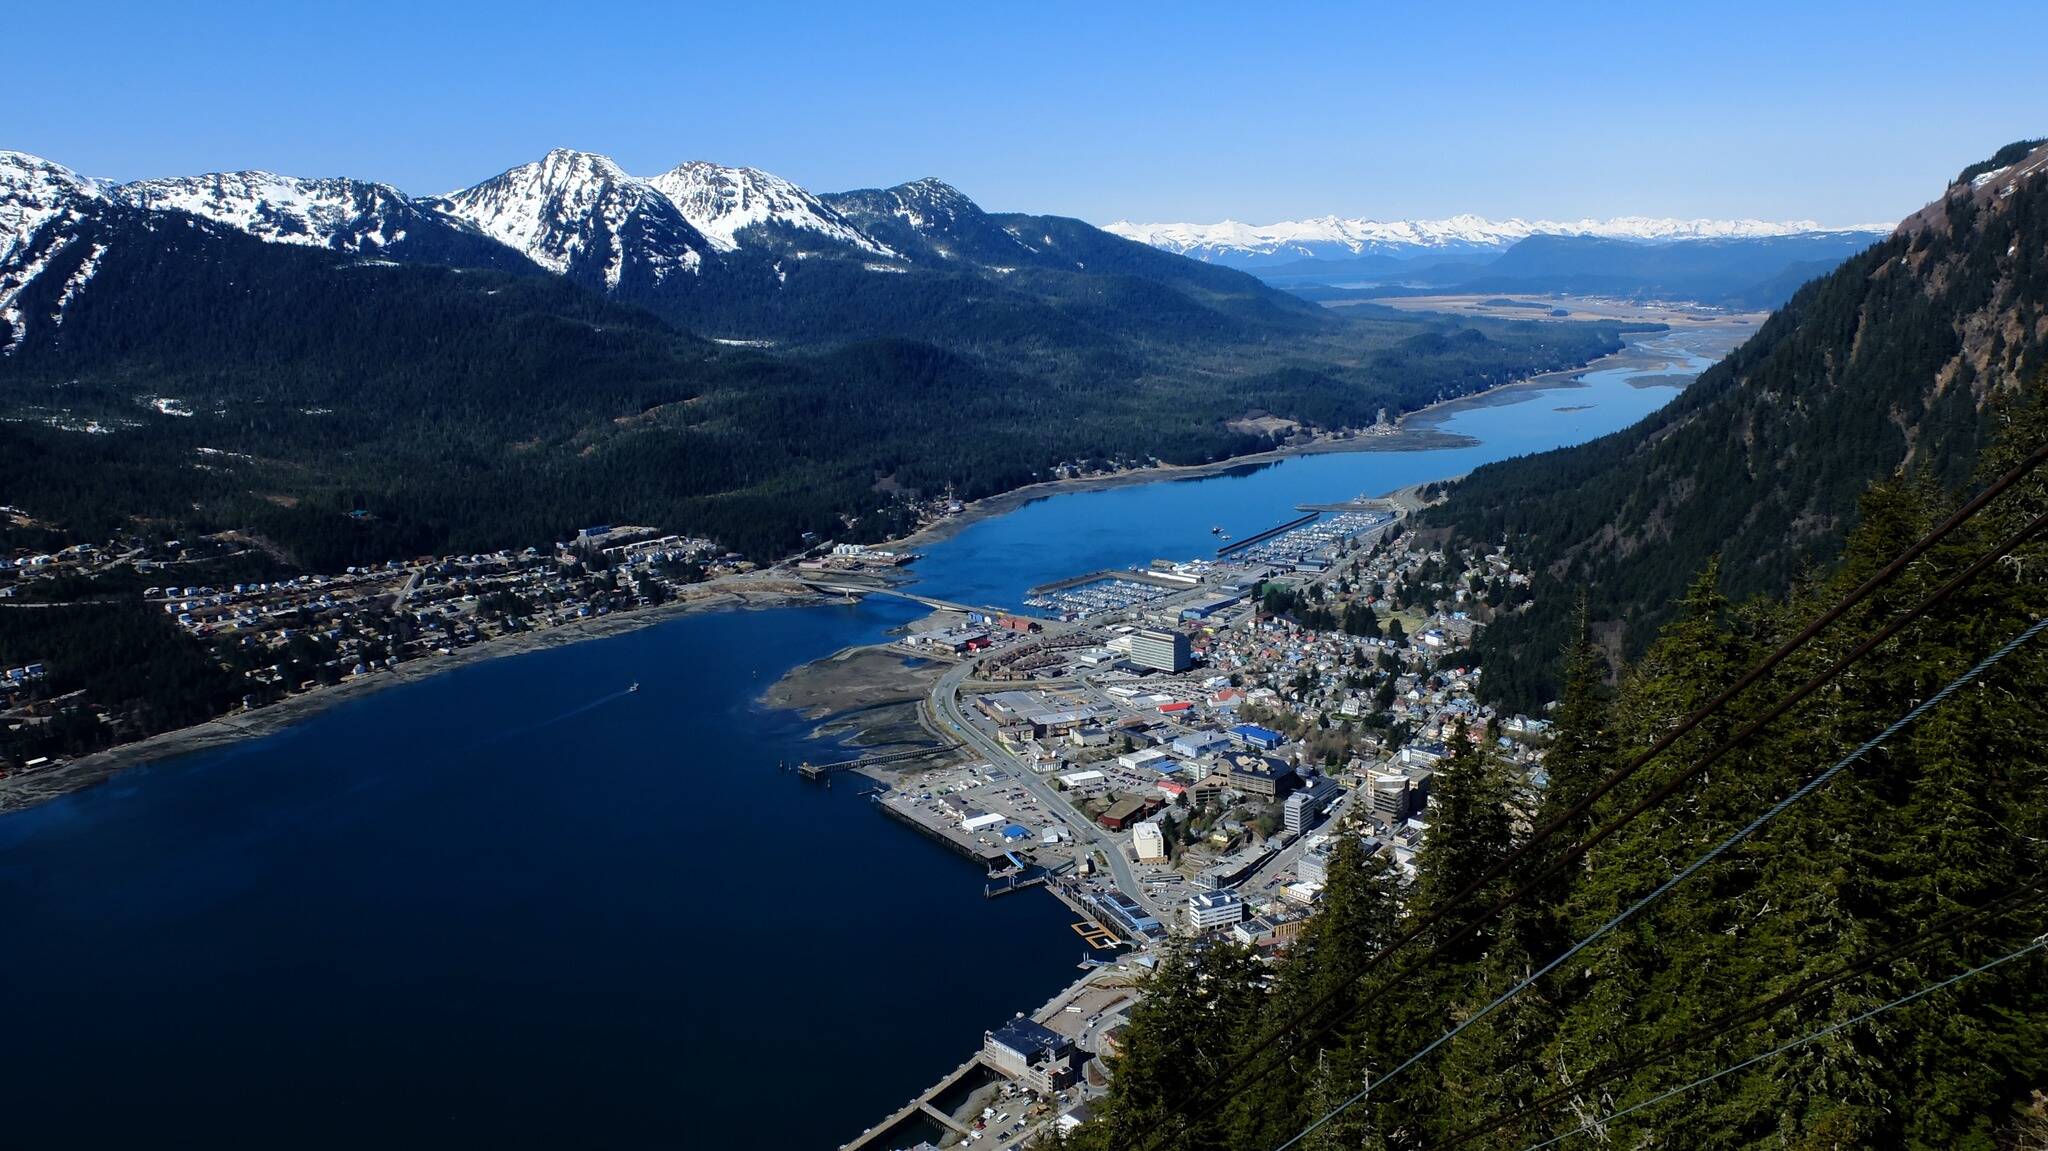 A view of Gastineau Channel, where a second crossing between Juneau and Douglas north of the current bridge is in the evaluation stage. (City and Borough of Juneau photo)